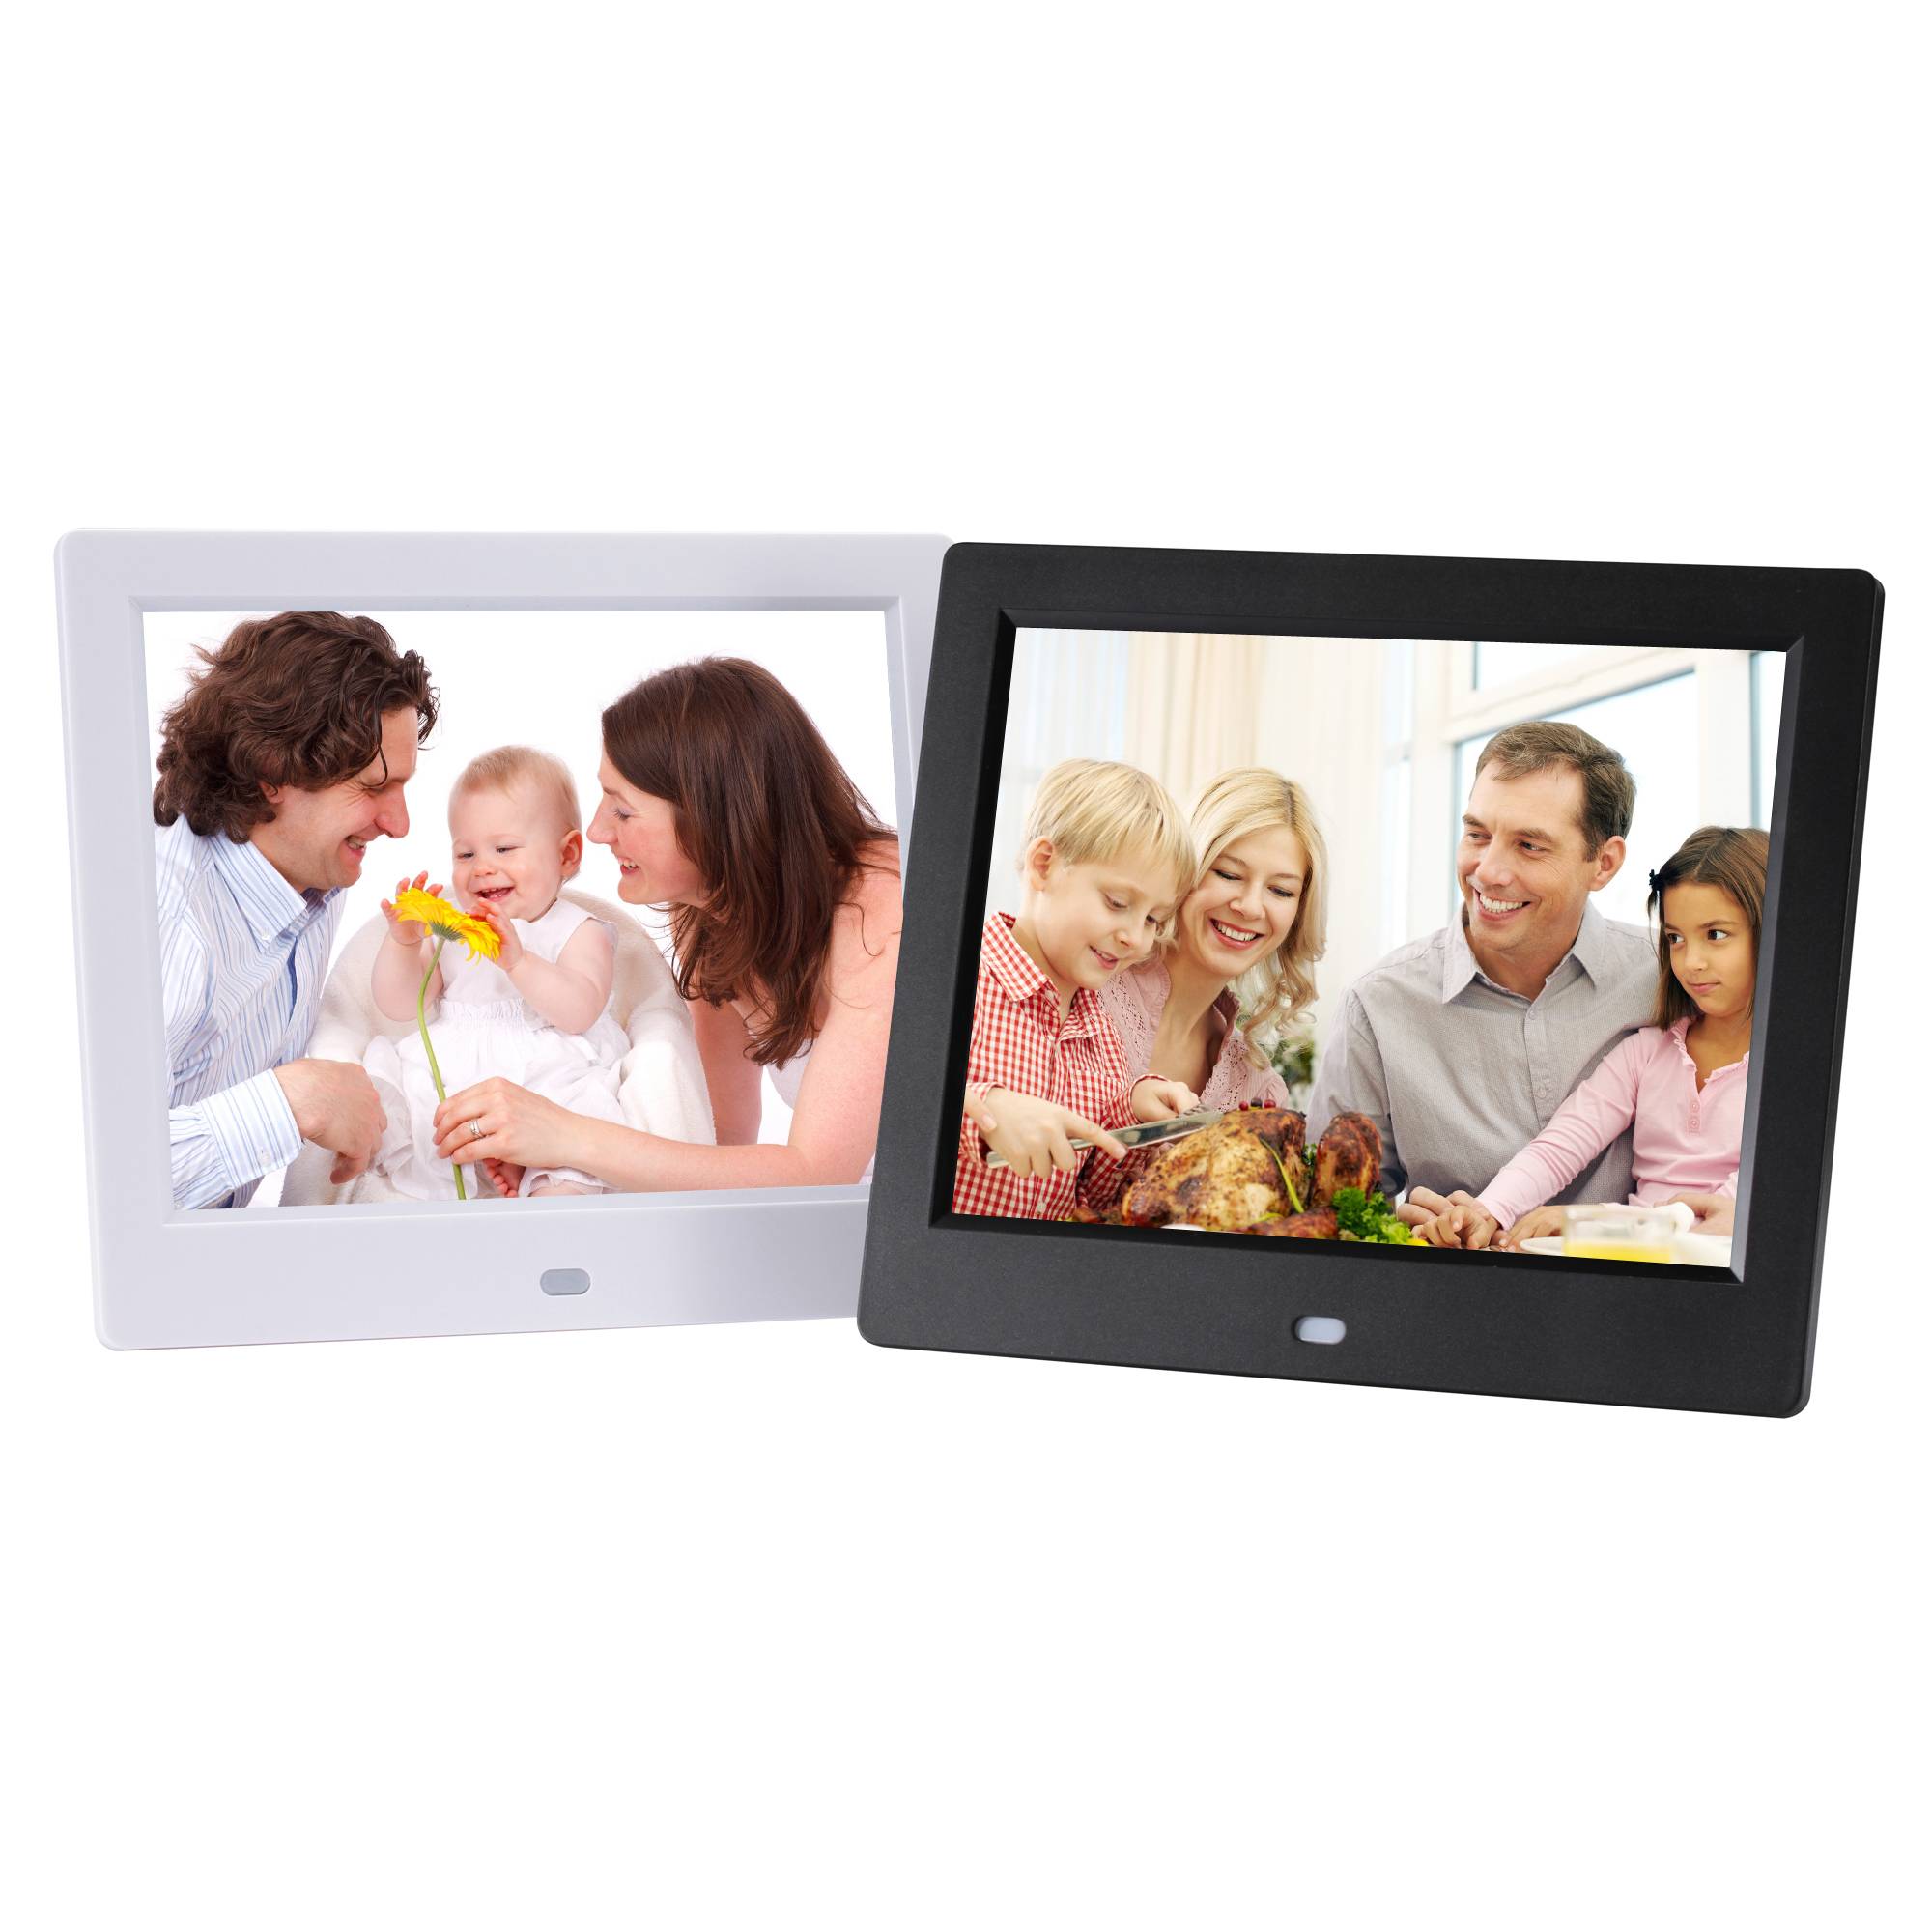 2021 Good Quality Wifi Picture Frame - 8 inch slideshow cheap video player digital picture frame digital photo frame commercial advertising HD support 720P – Idealway